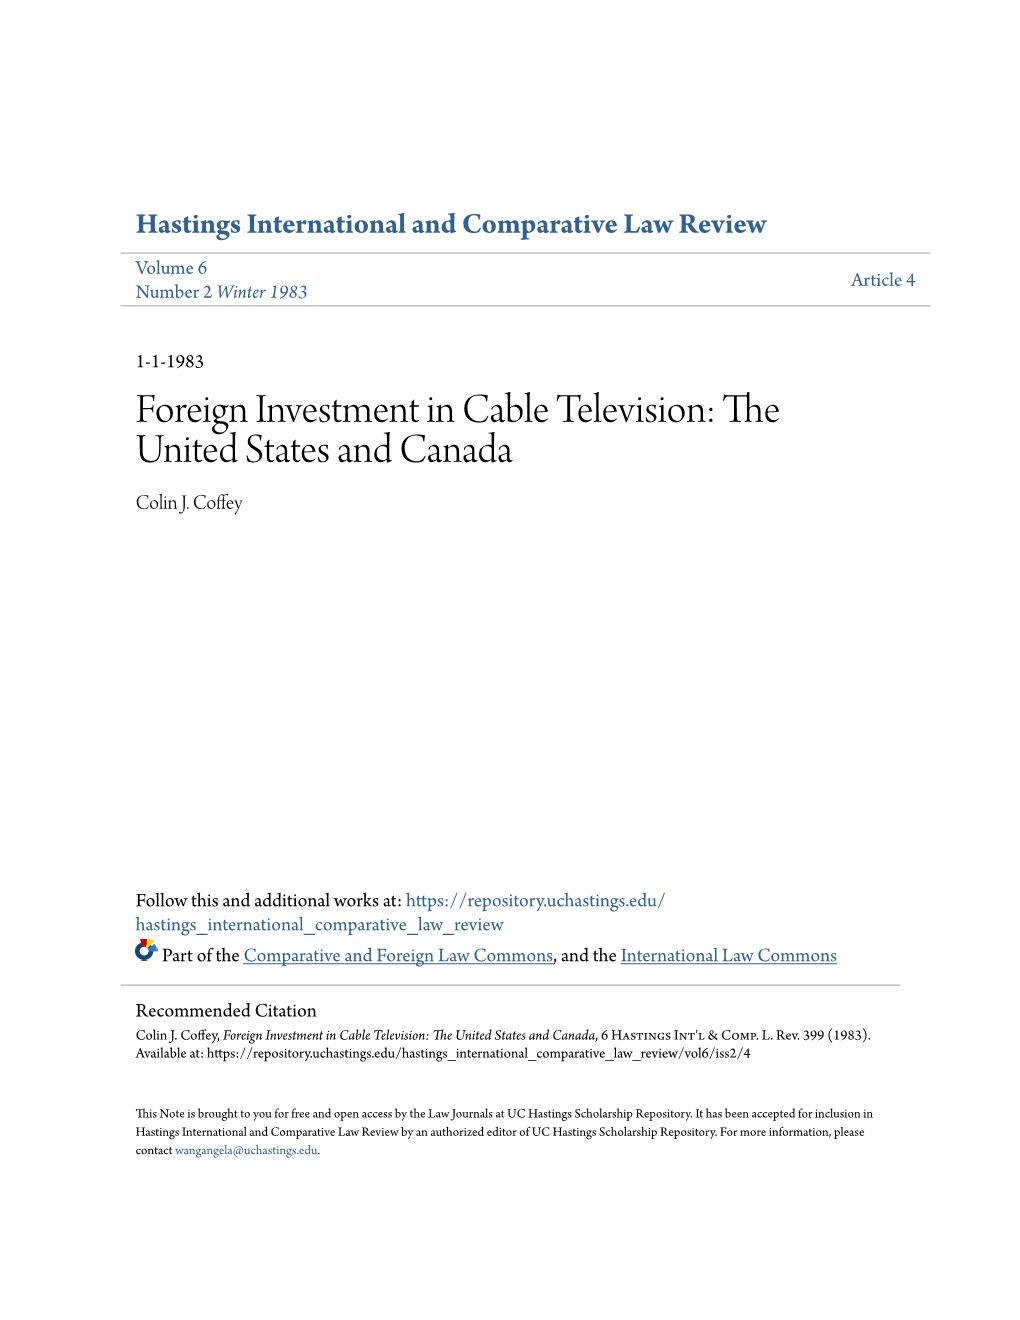 Foreign Investment in Cable Television: the United States and Canada Colin J